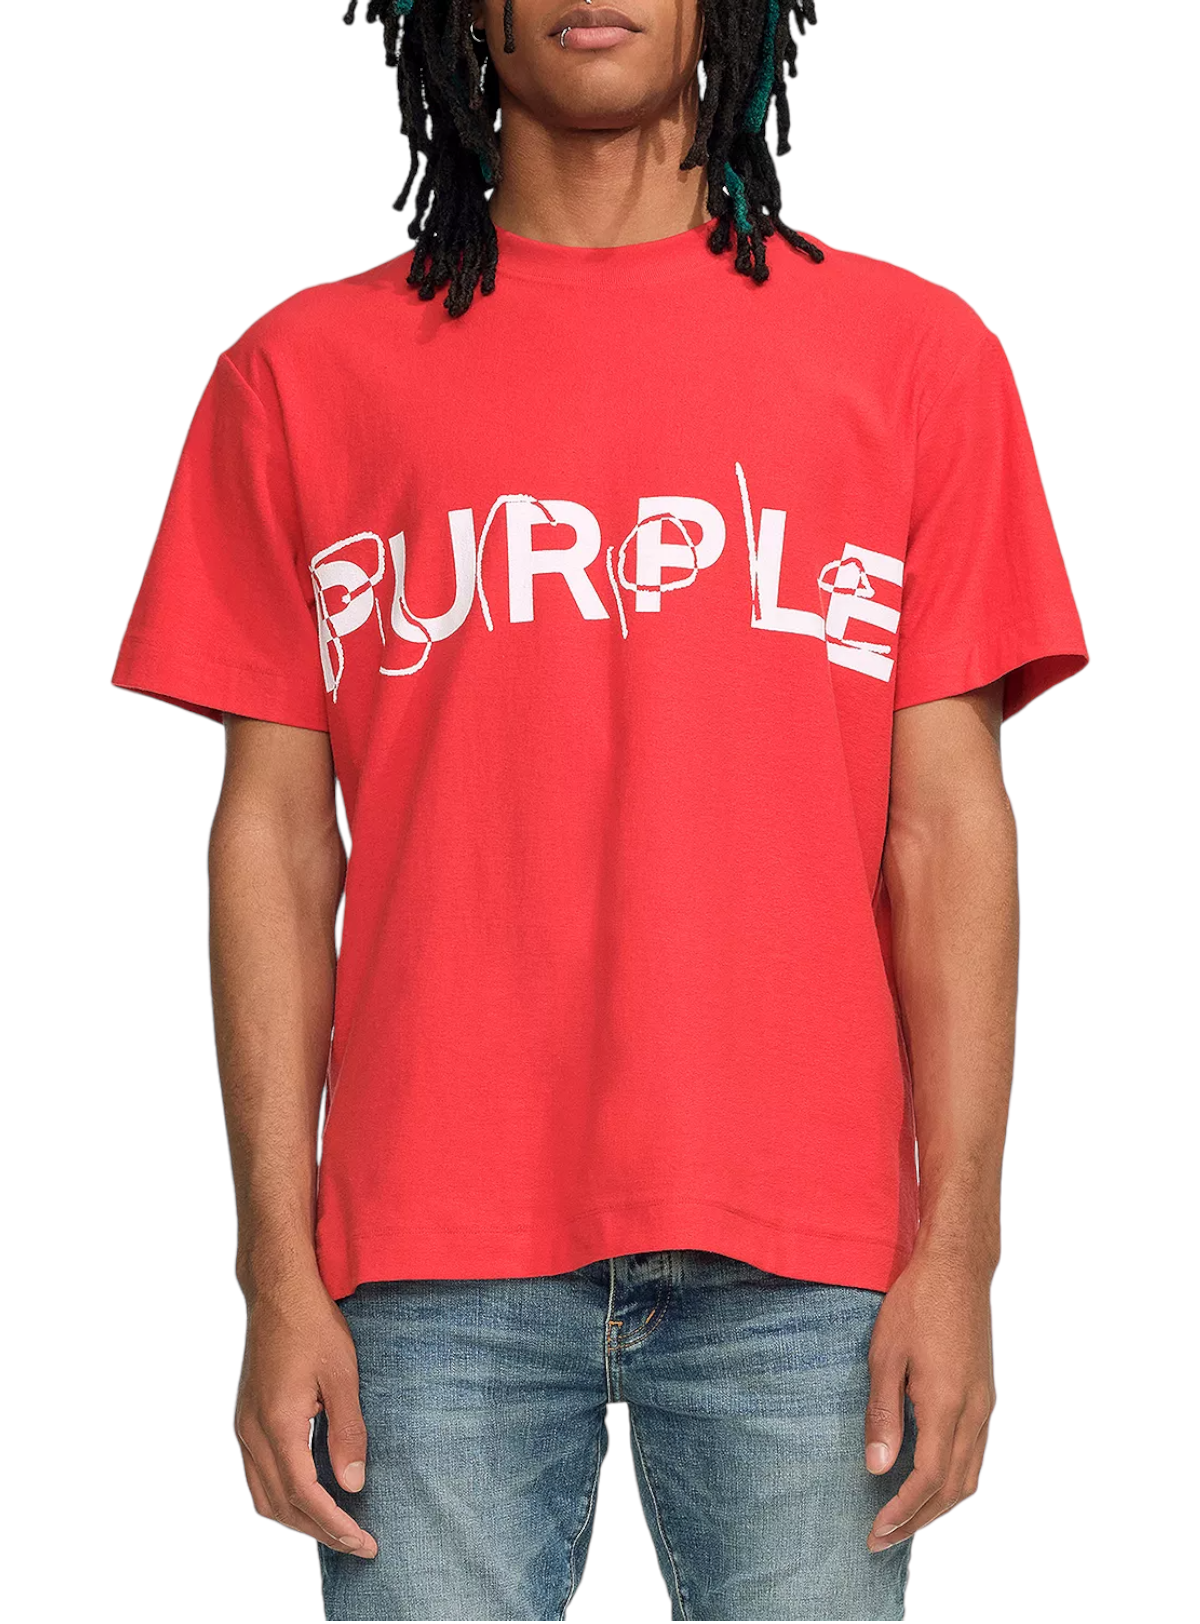 Purple Brand All Over Print Textured Jersey T-Shirt 2XL / Red